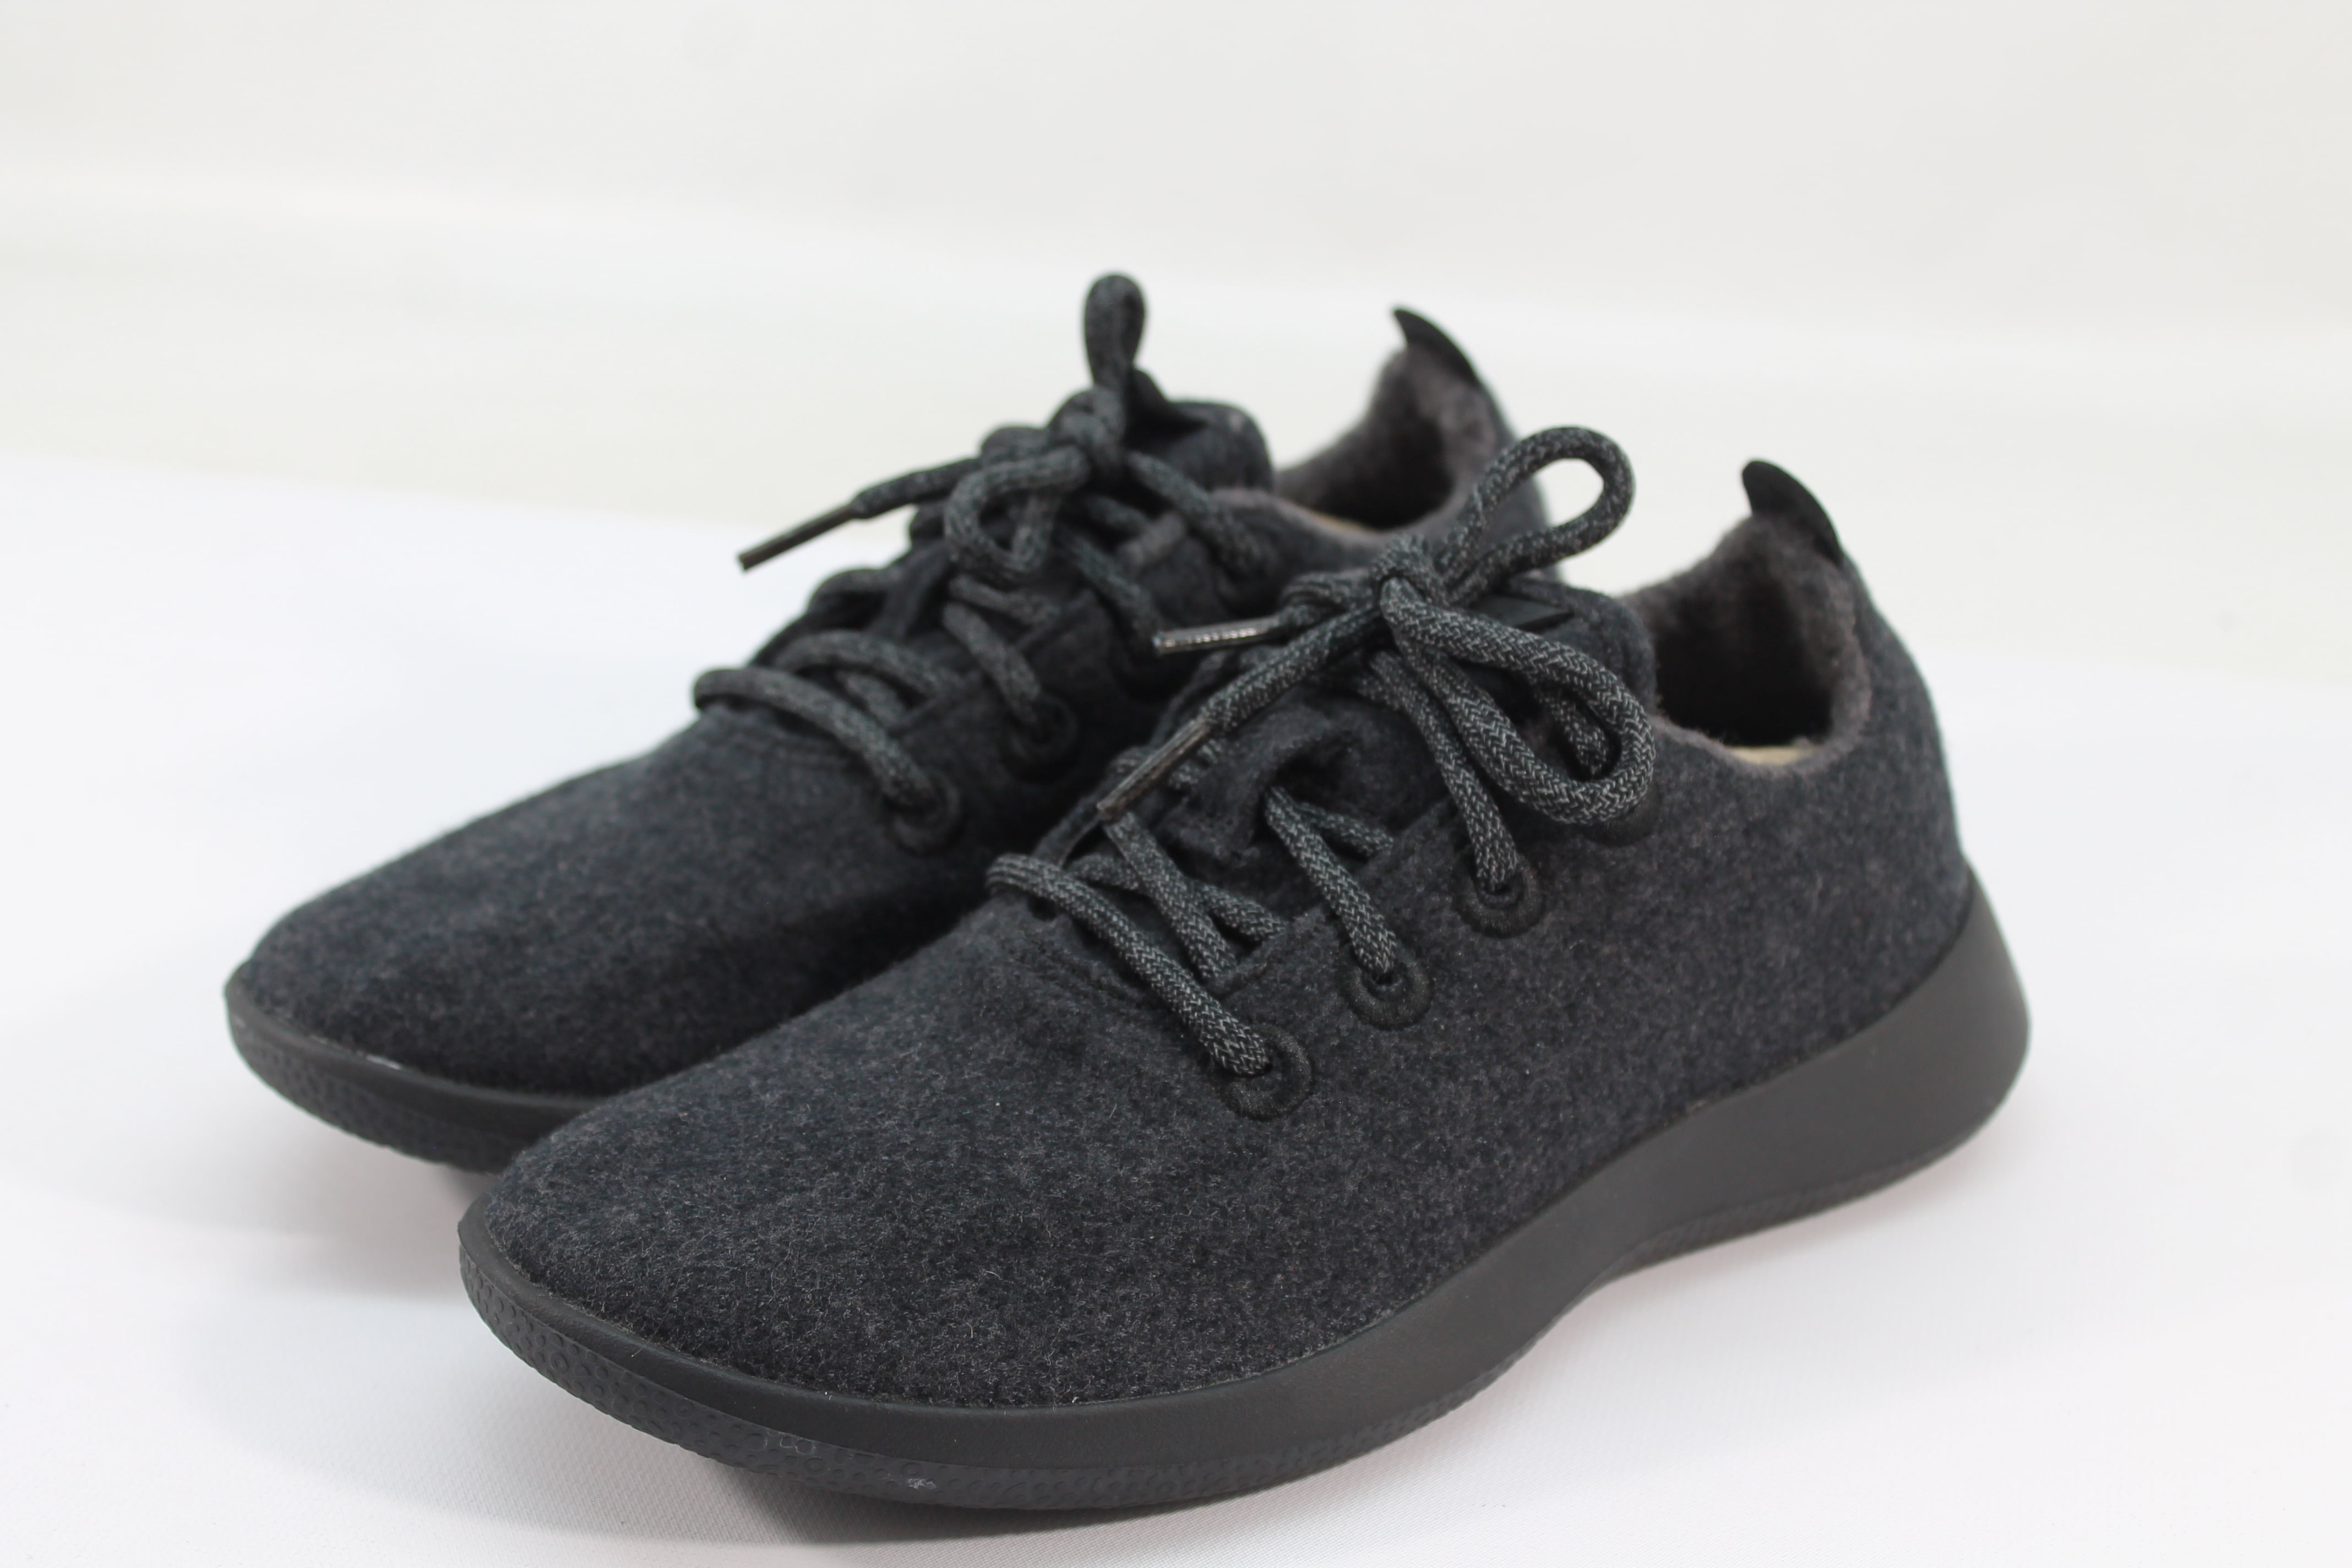 Allbirds Men's Tree Toppers Charcoal/Navy eyelet Comfort Shoes NW/OB 